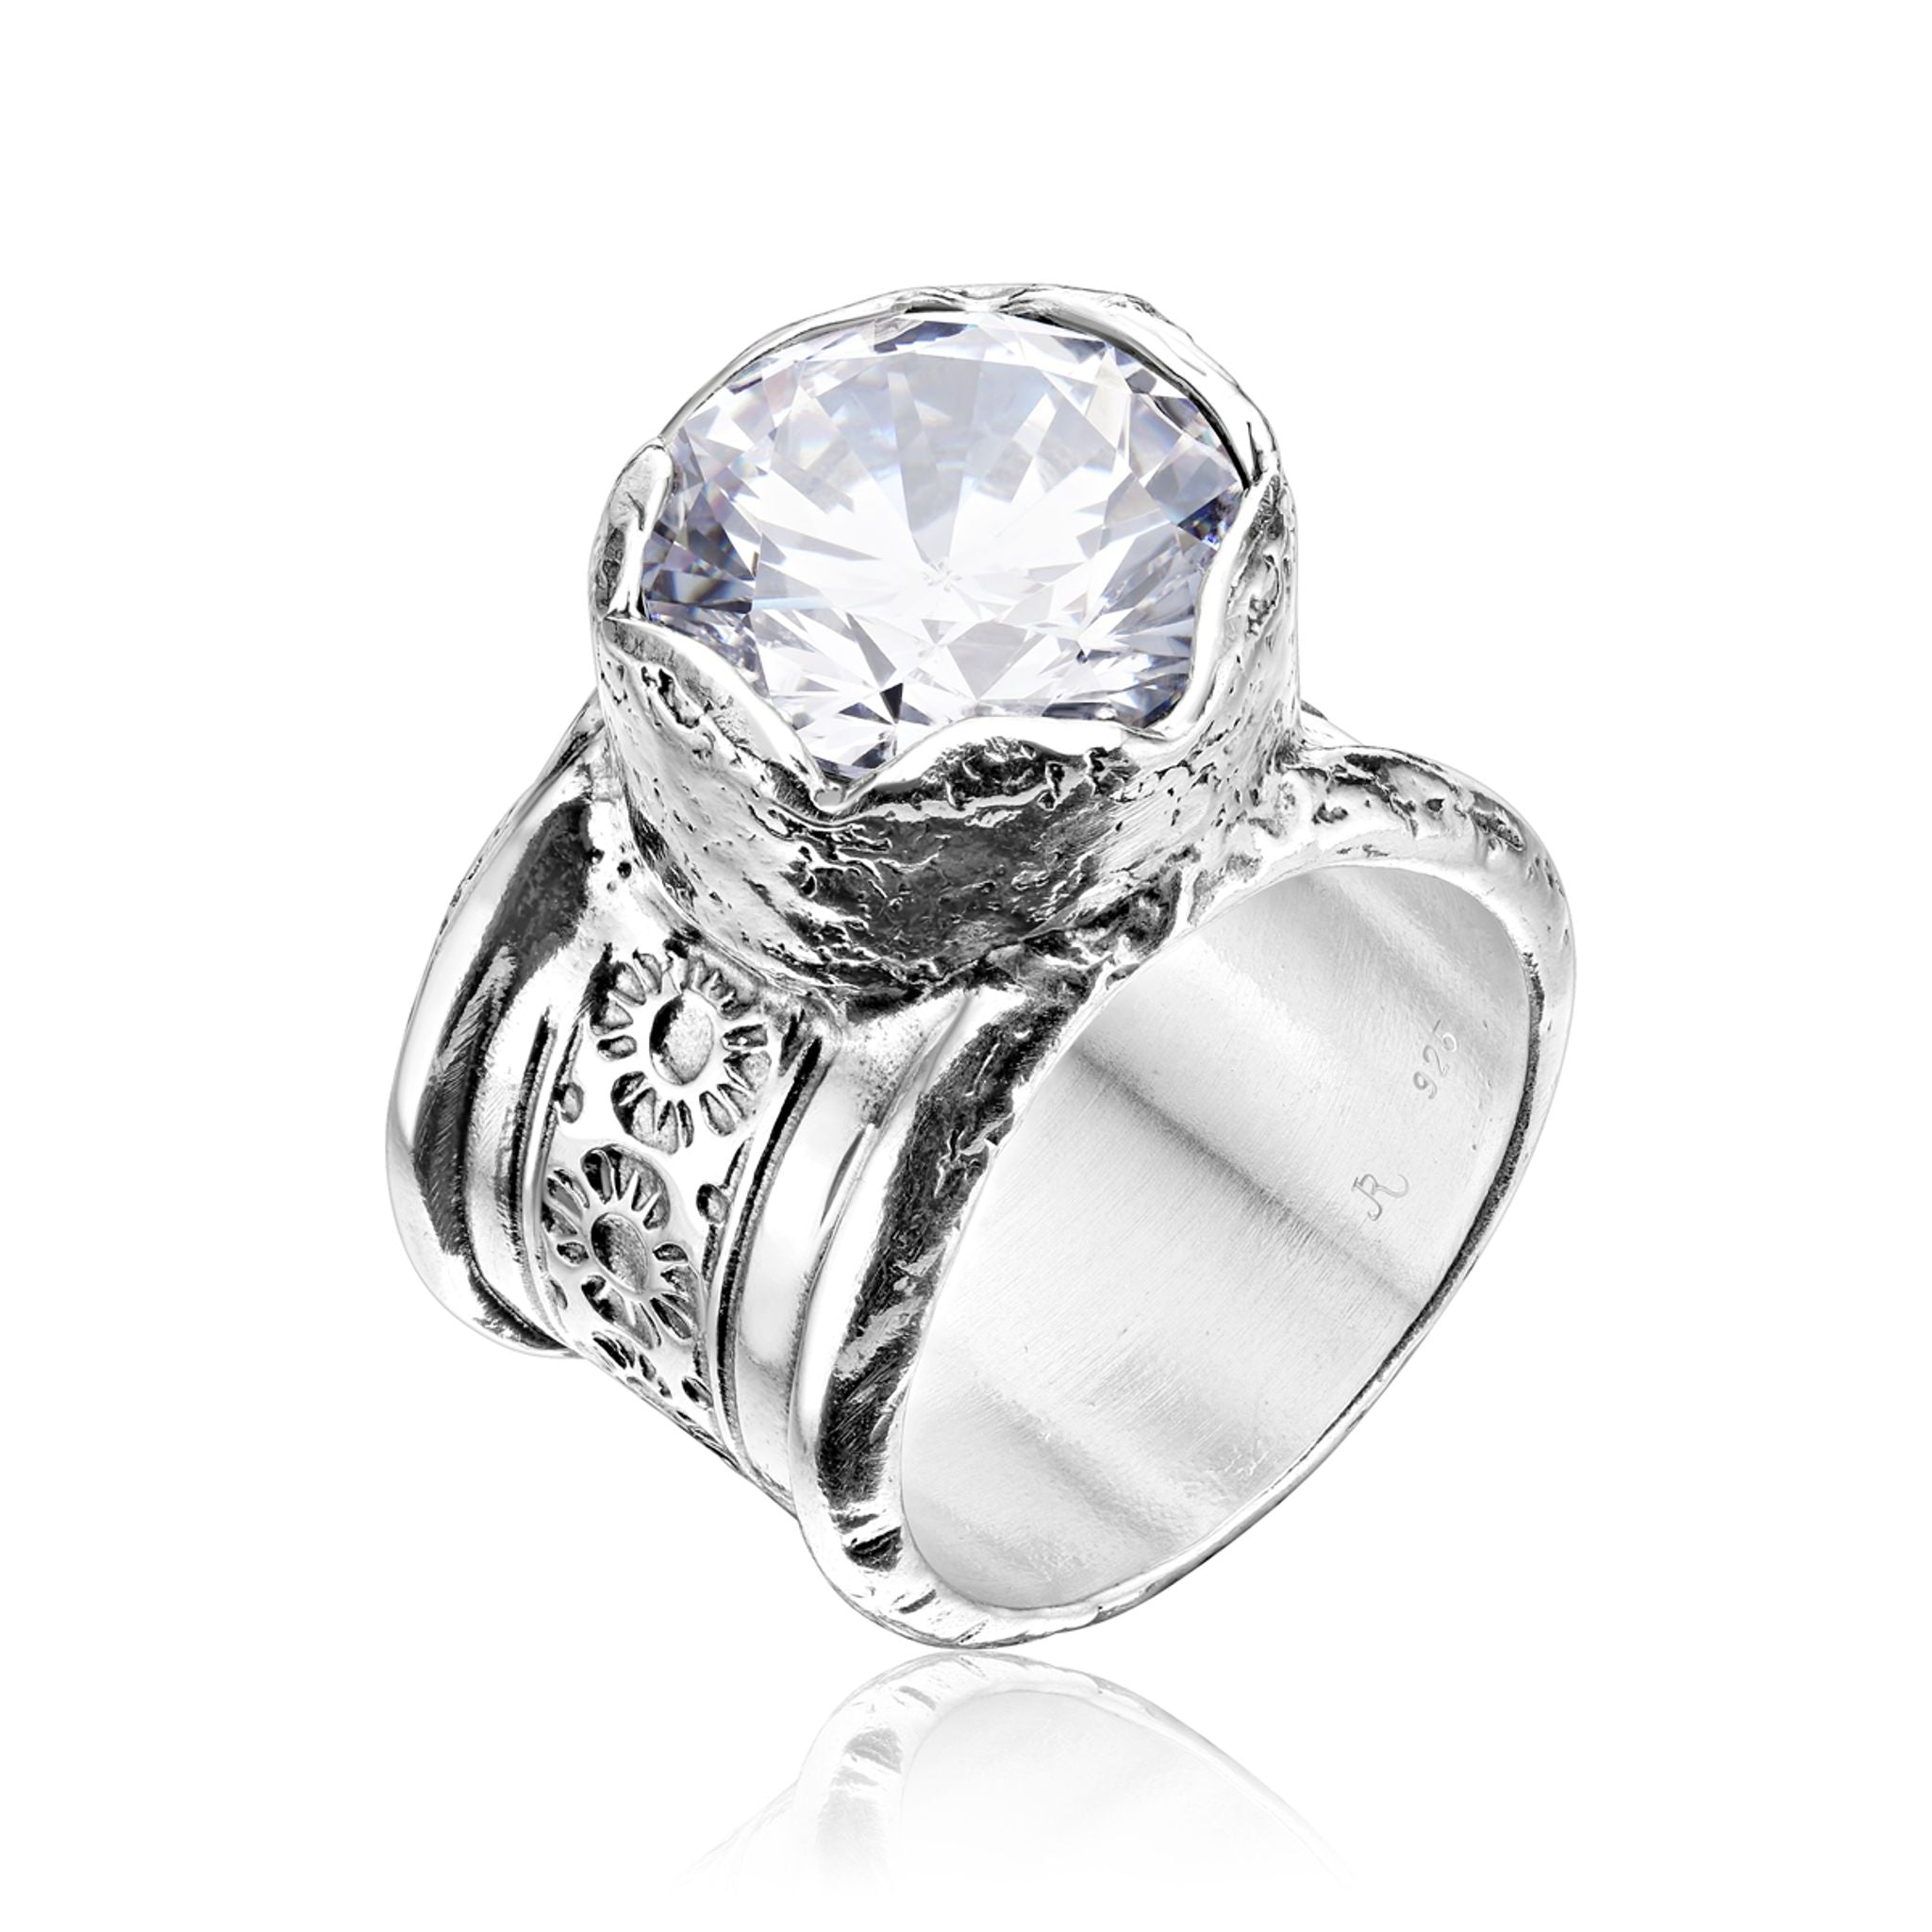 Wide Sterling Silver CZ Floral Ring